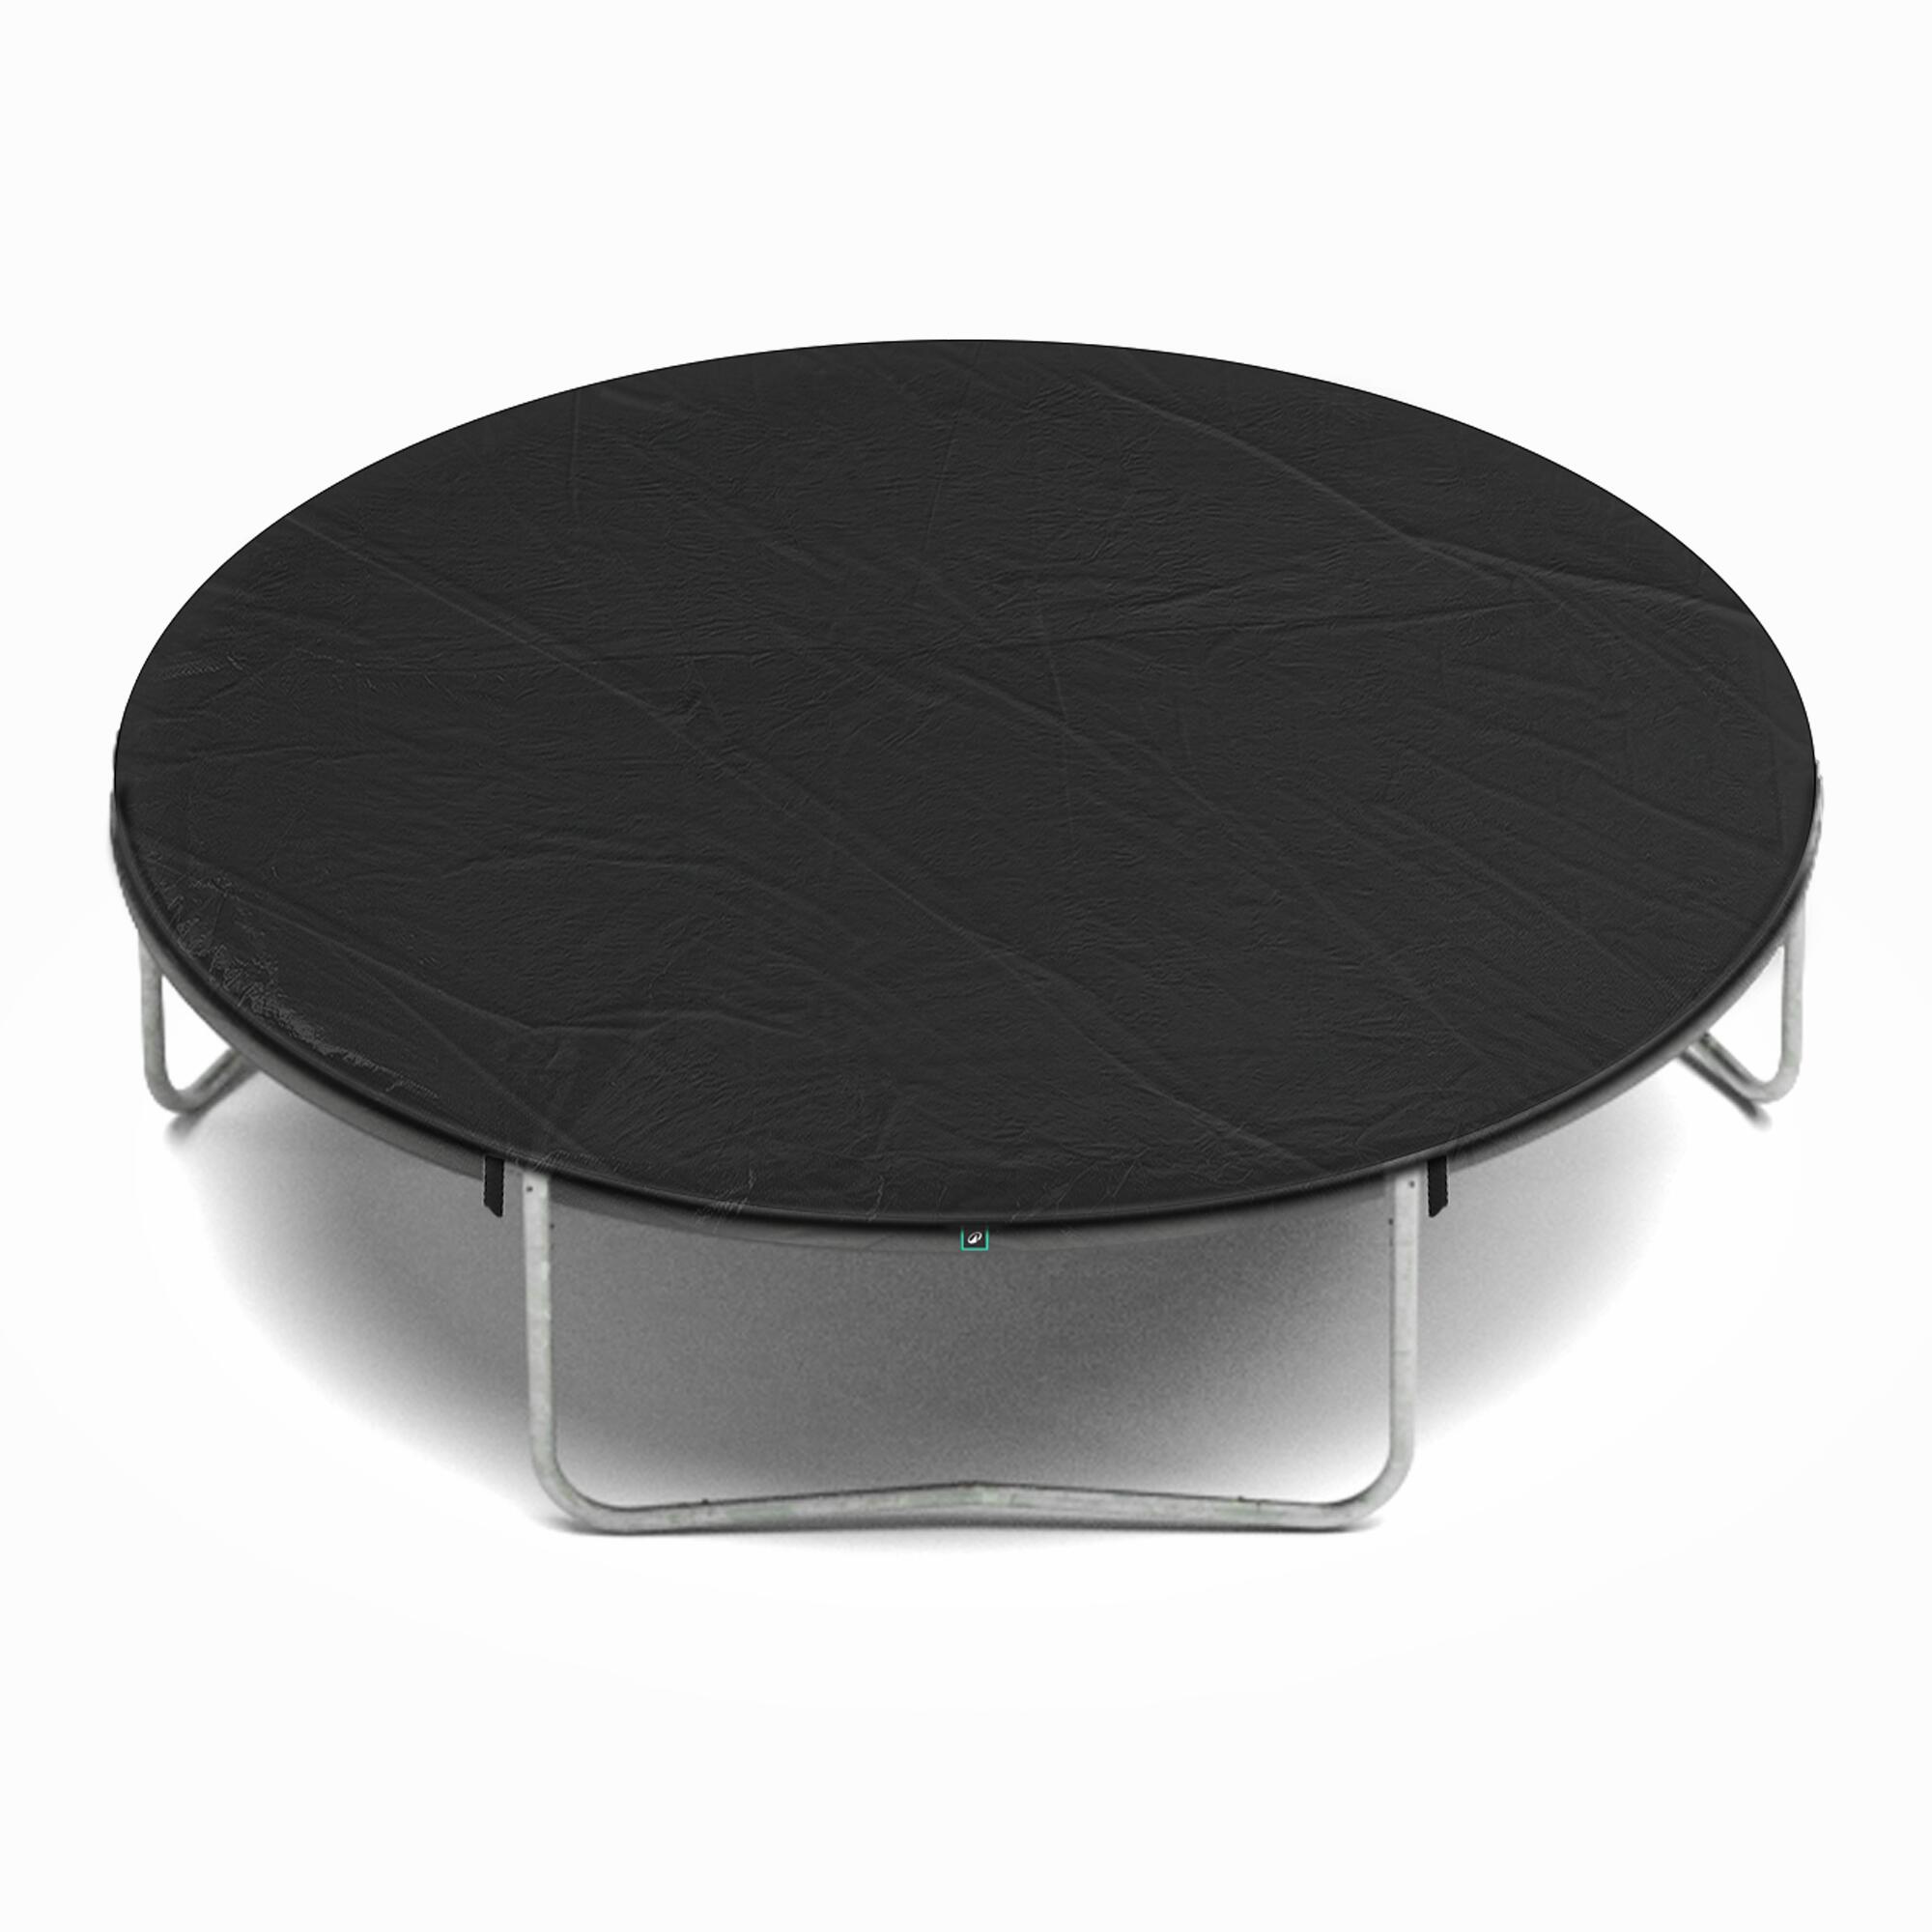 DOMYOS Protective Cover for Trampoline 300